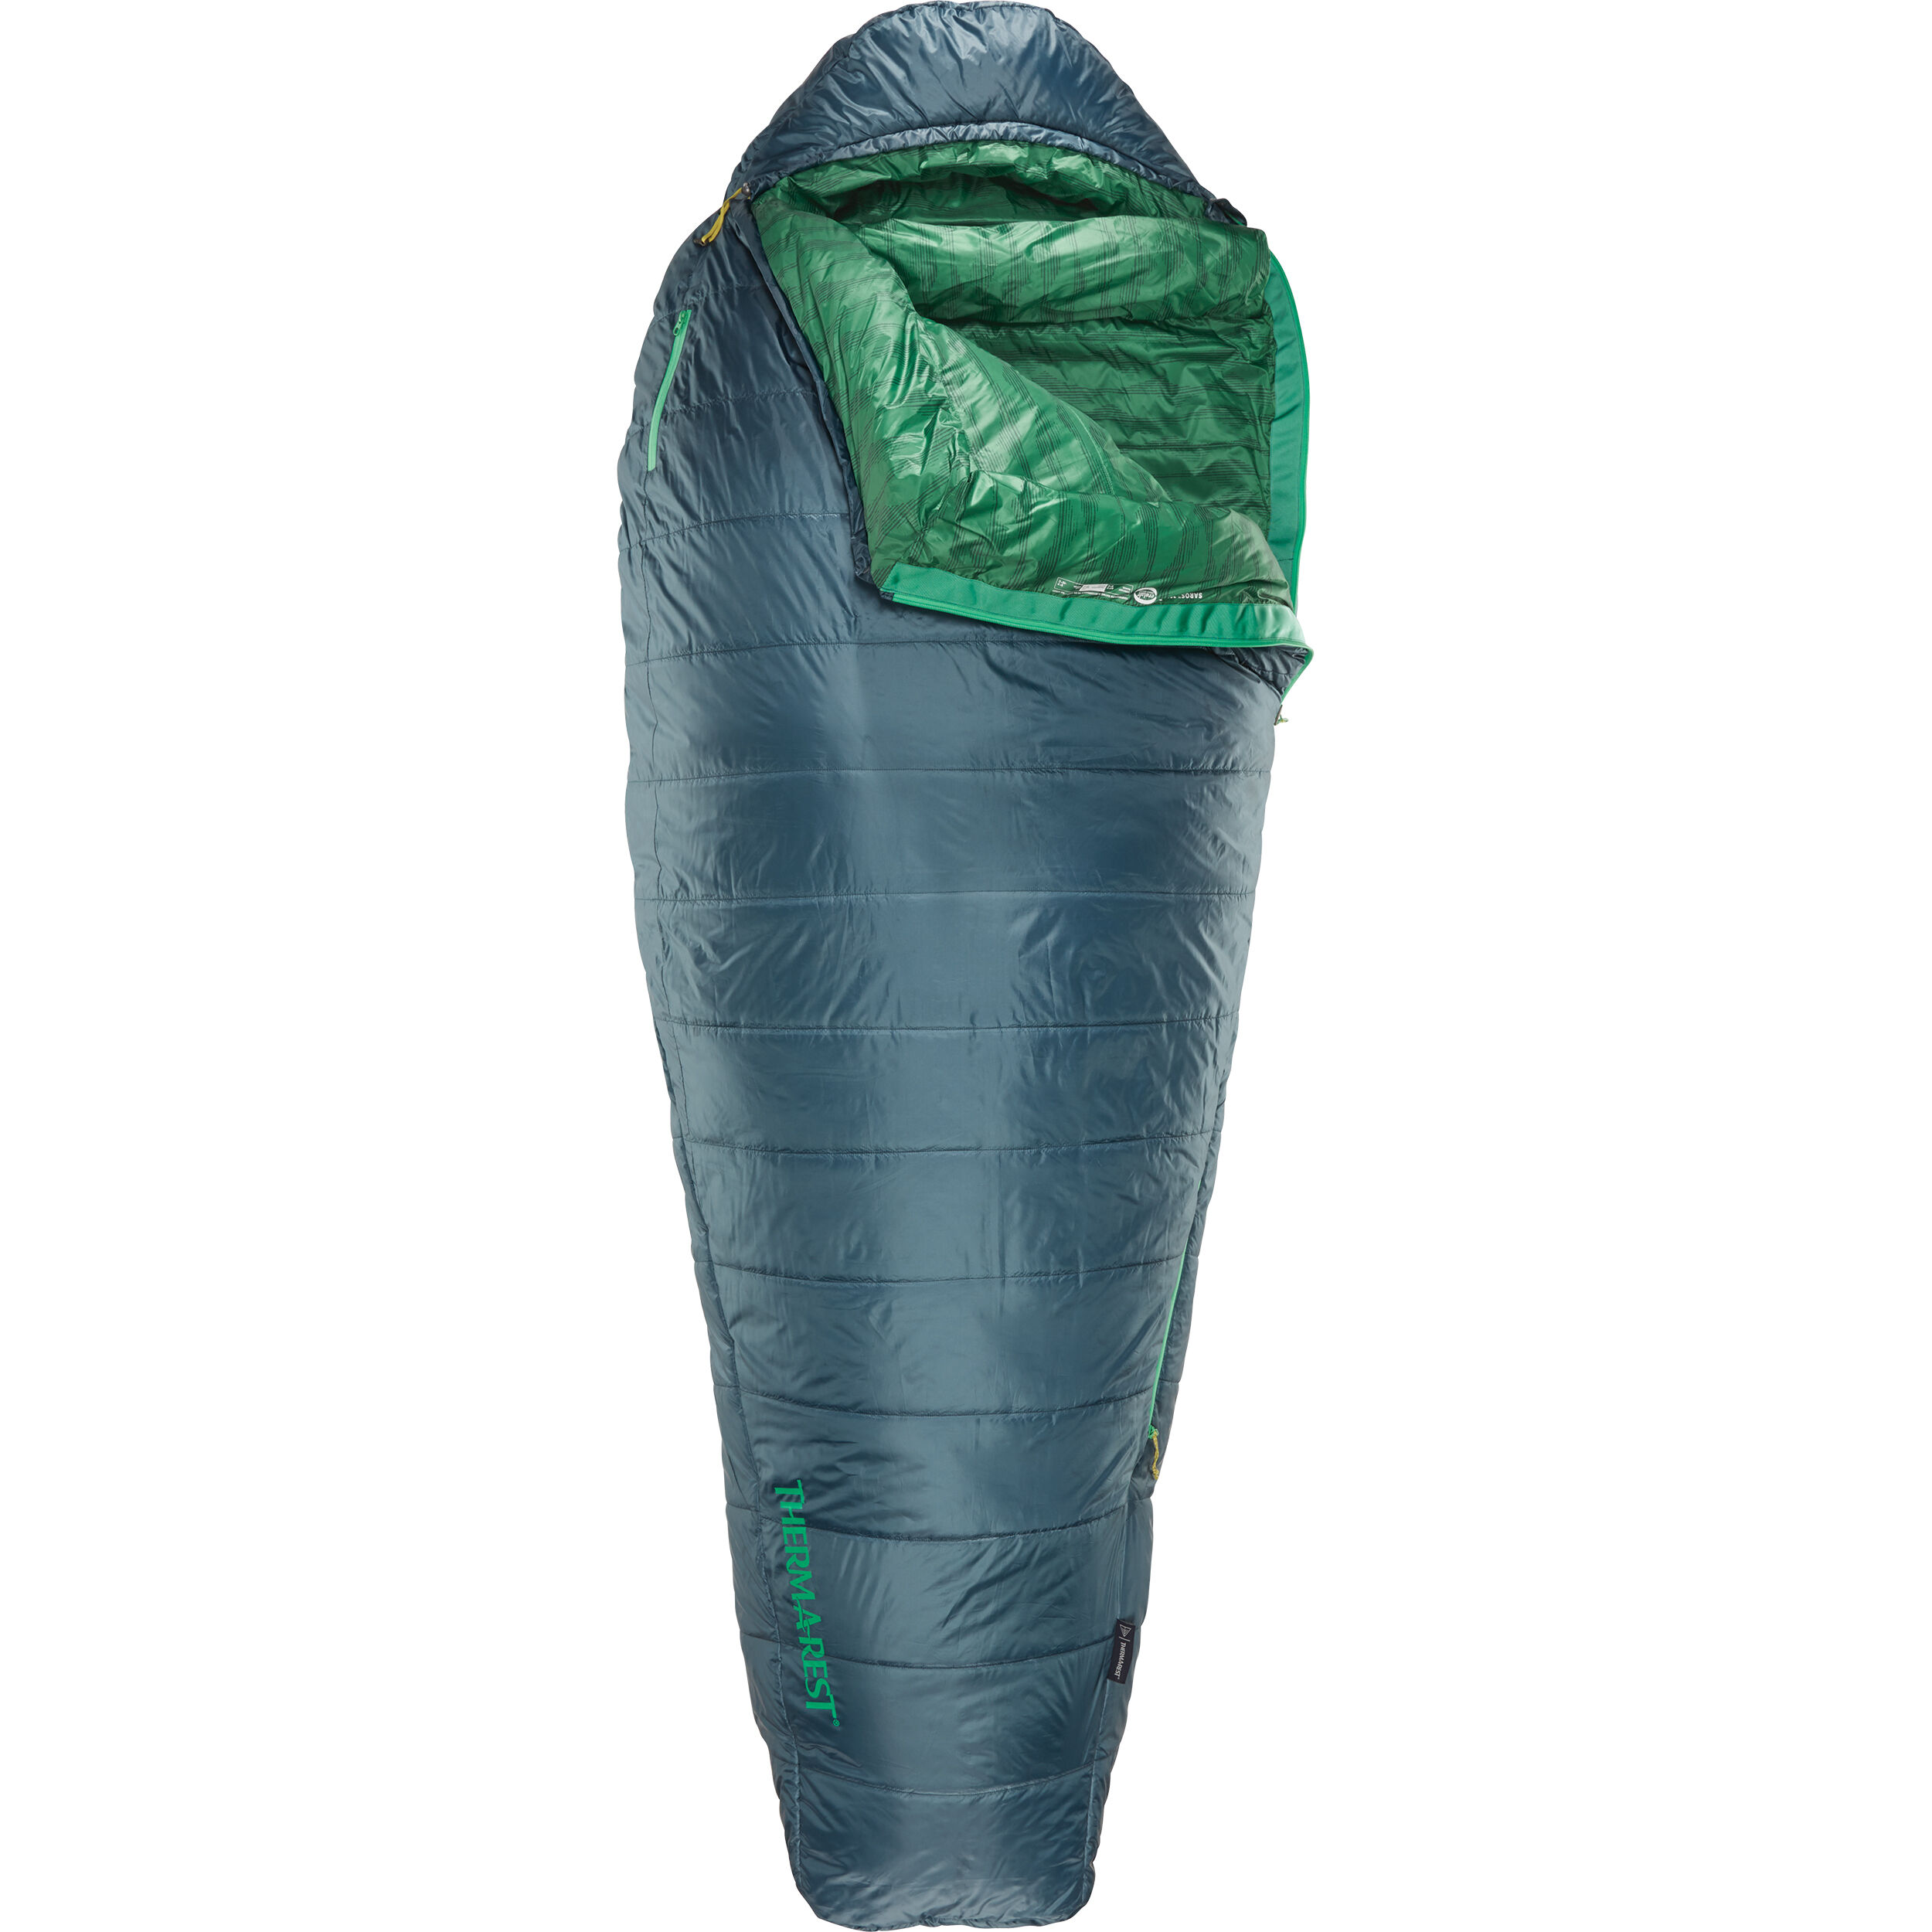 Sleeping Bags & Quilts | Backpacking, Camping | Therm-a-Rest